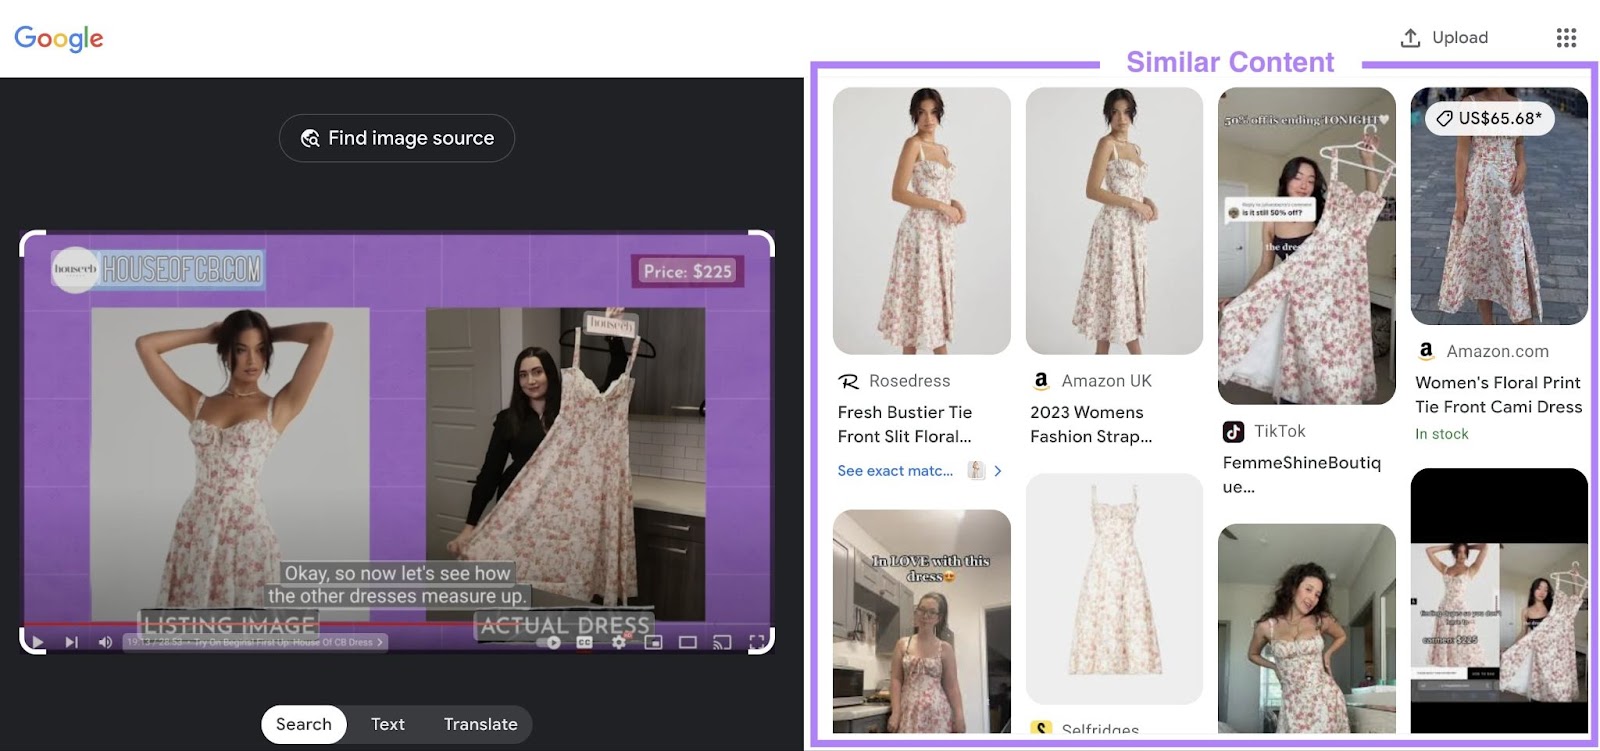 Google video search revealing similar content showing same dress as the one in the YouTube video